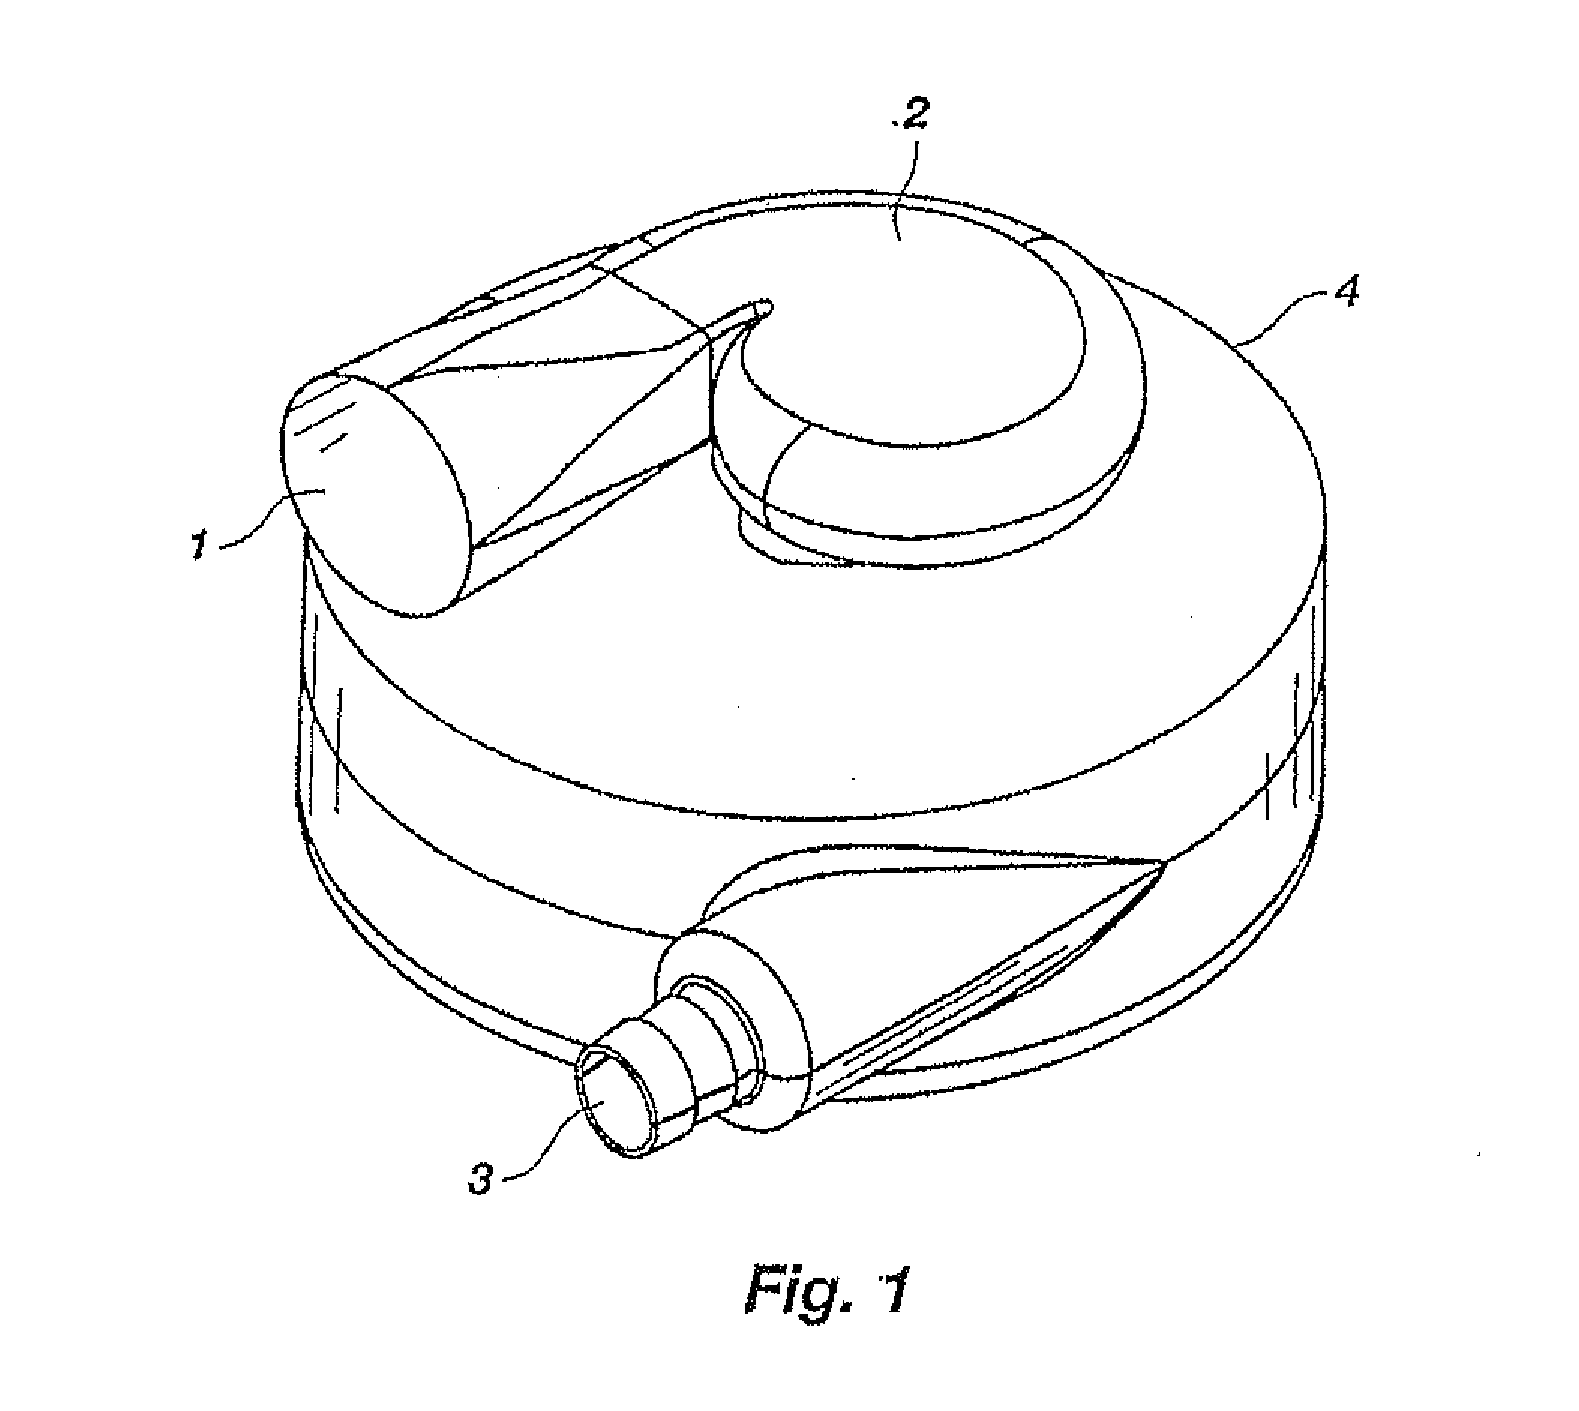 Implantable centrifugal blood pump with hybrid magnetic bearings